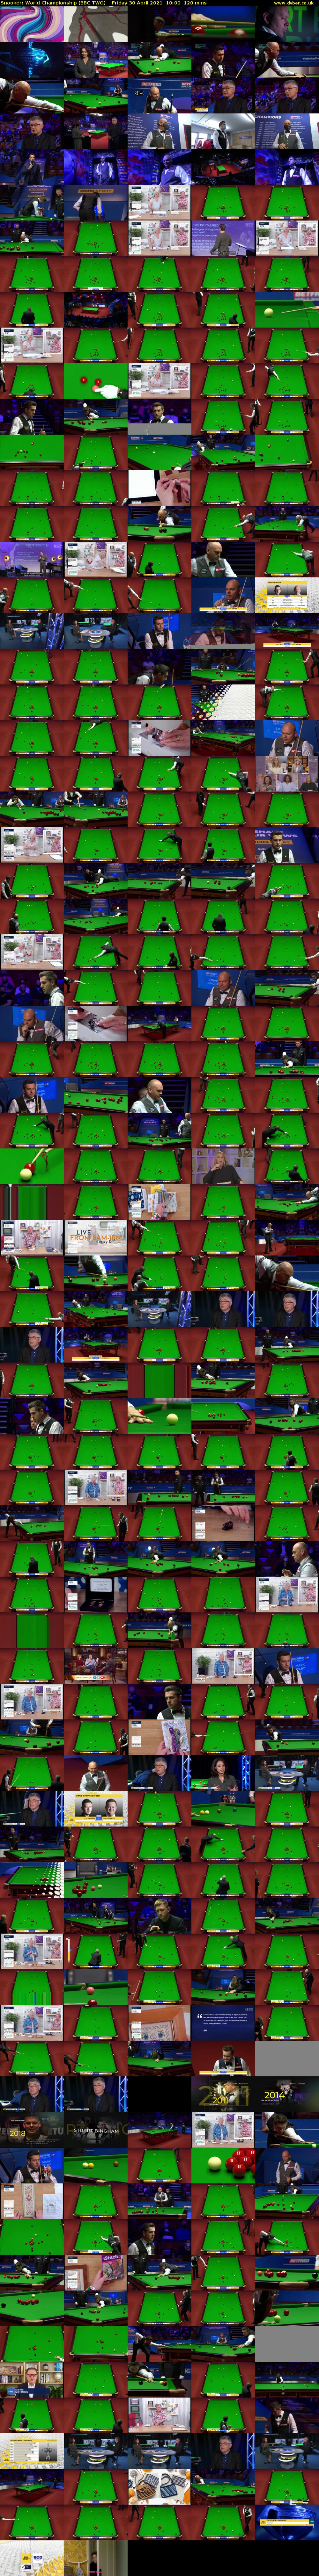 Snooker: World Championship (BBC TWO) Friday 30 April 2021 10:00 - 12:00